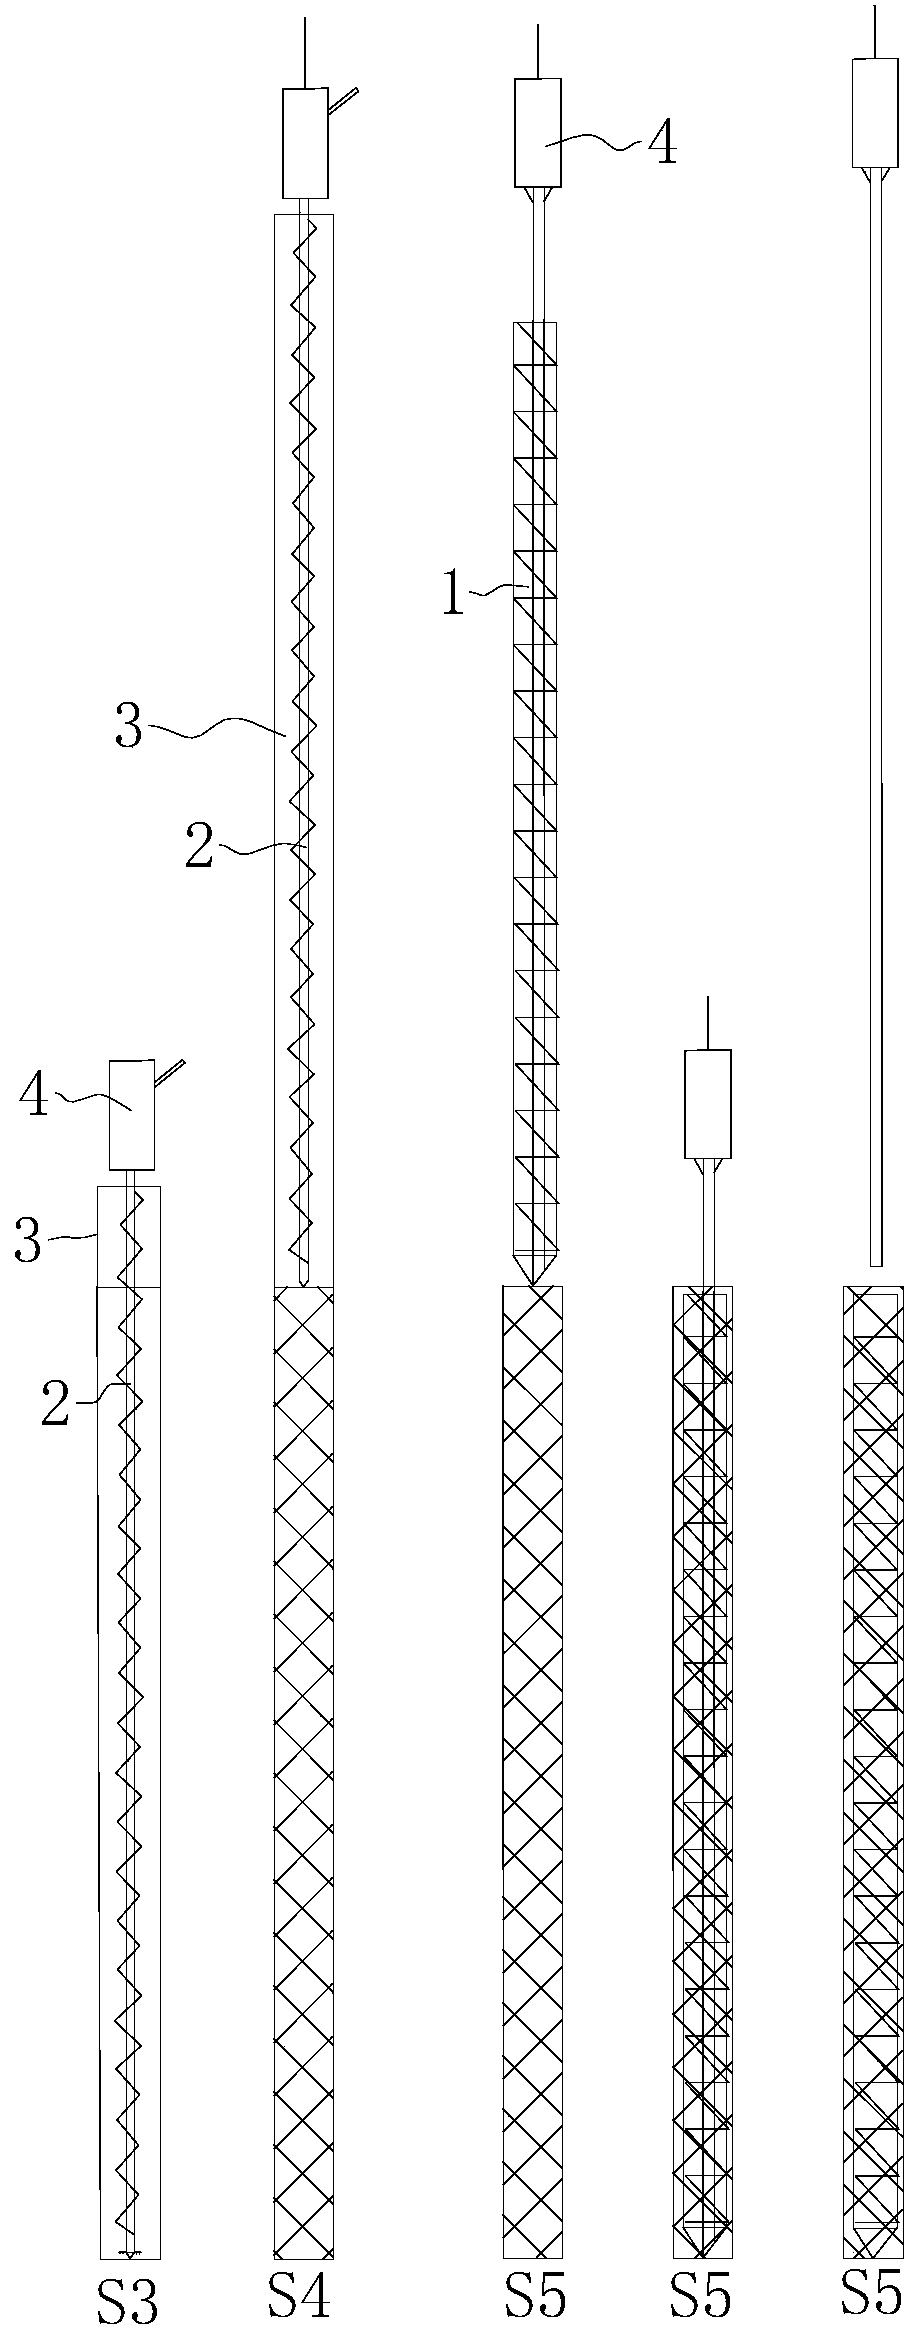 Construction method of full-casing follow-up long spiral drilling press-grouting secant pile